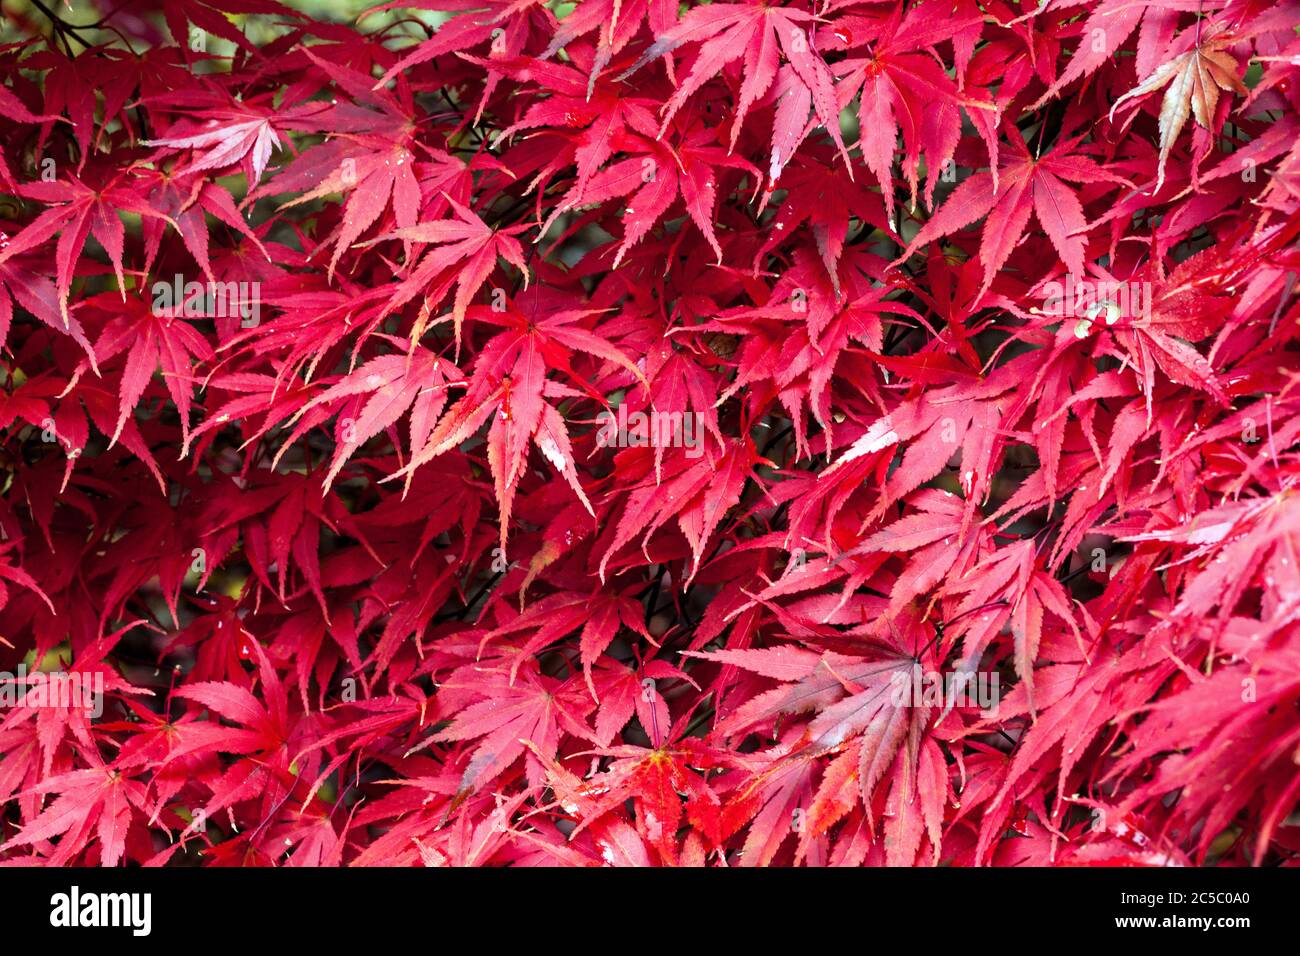 Autumn leaves garden red japanese maple red leaves Stock Photo